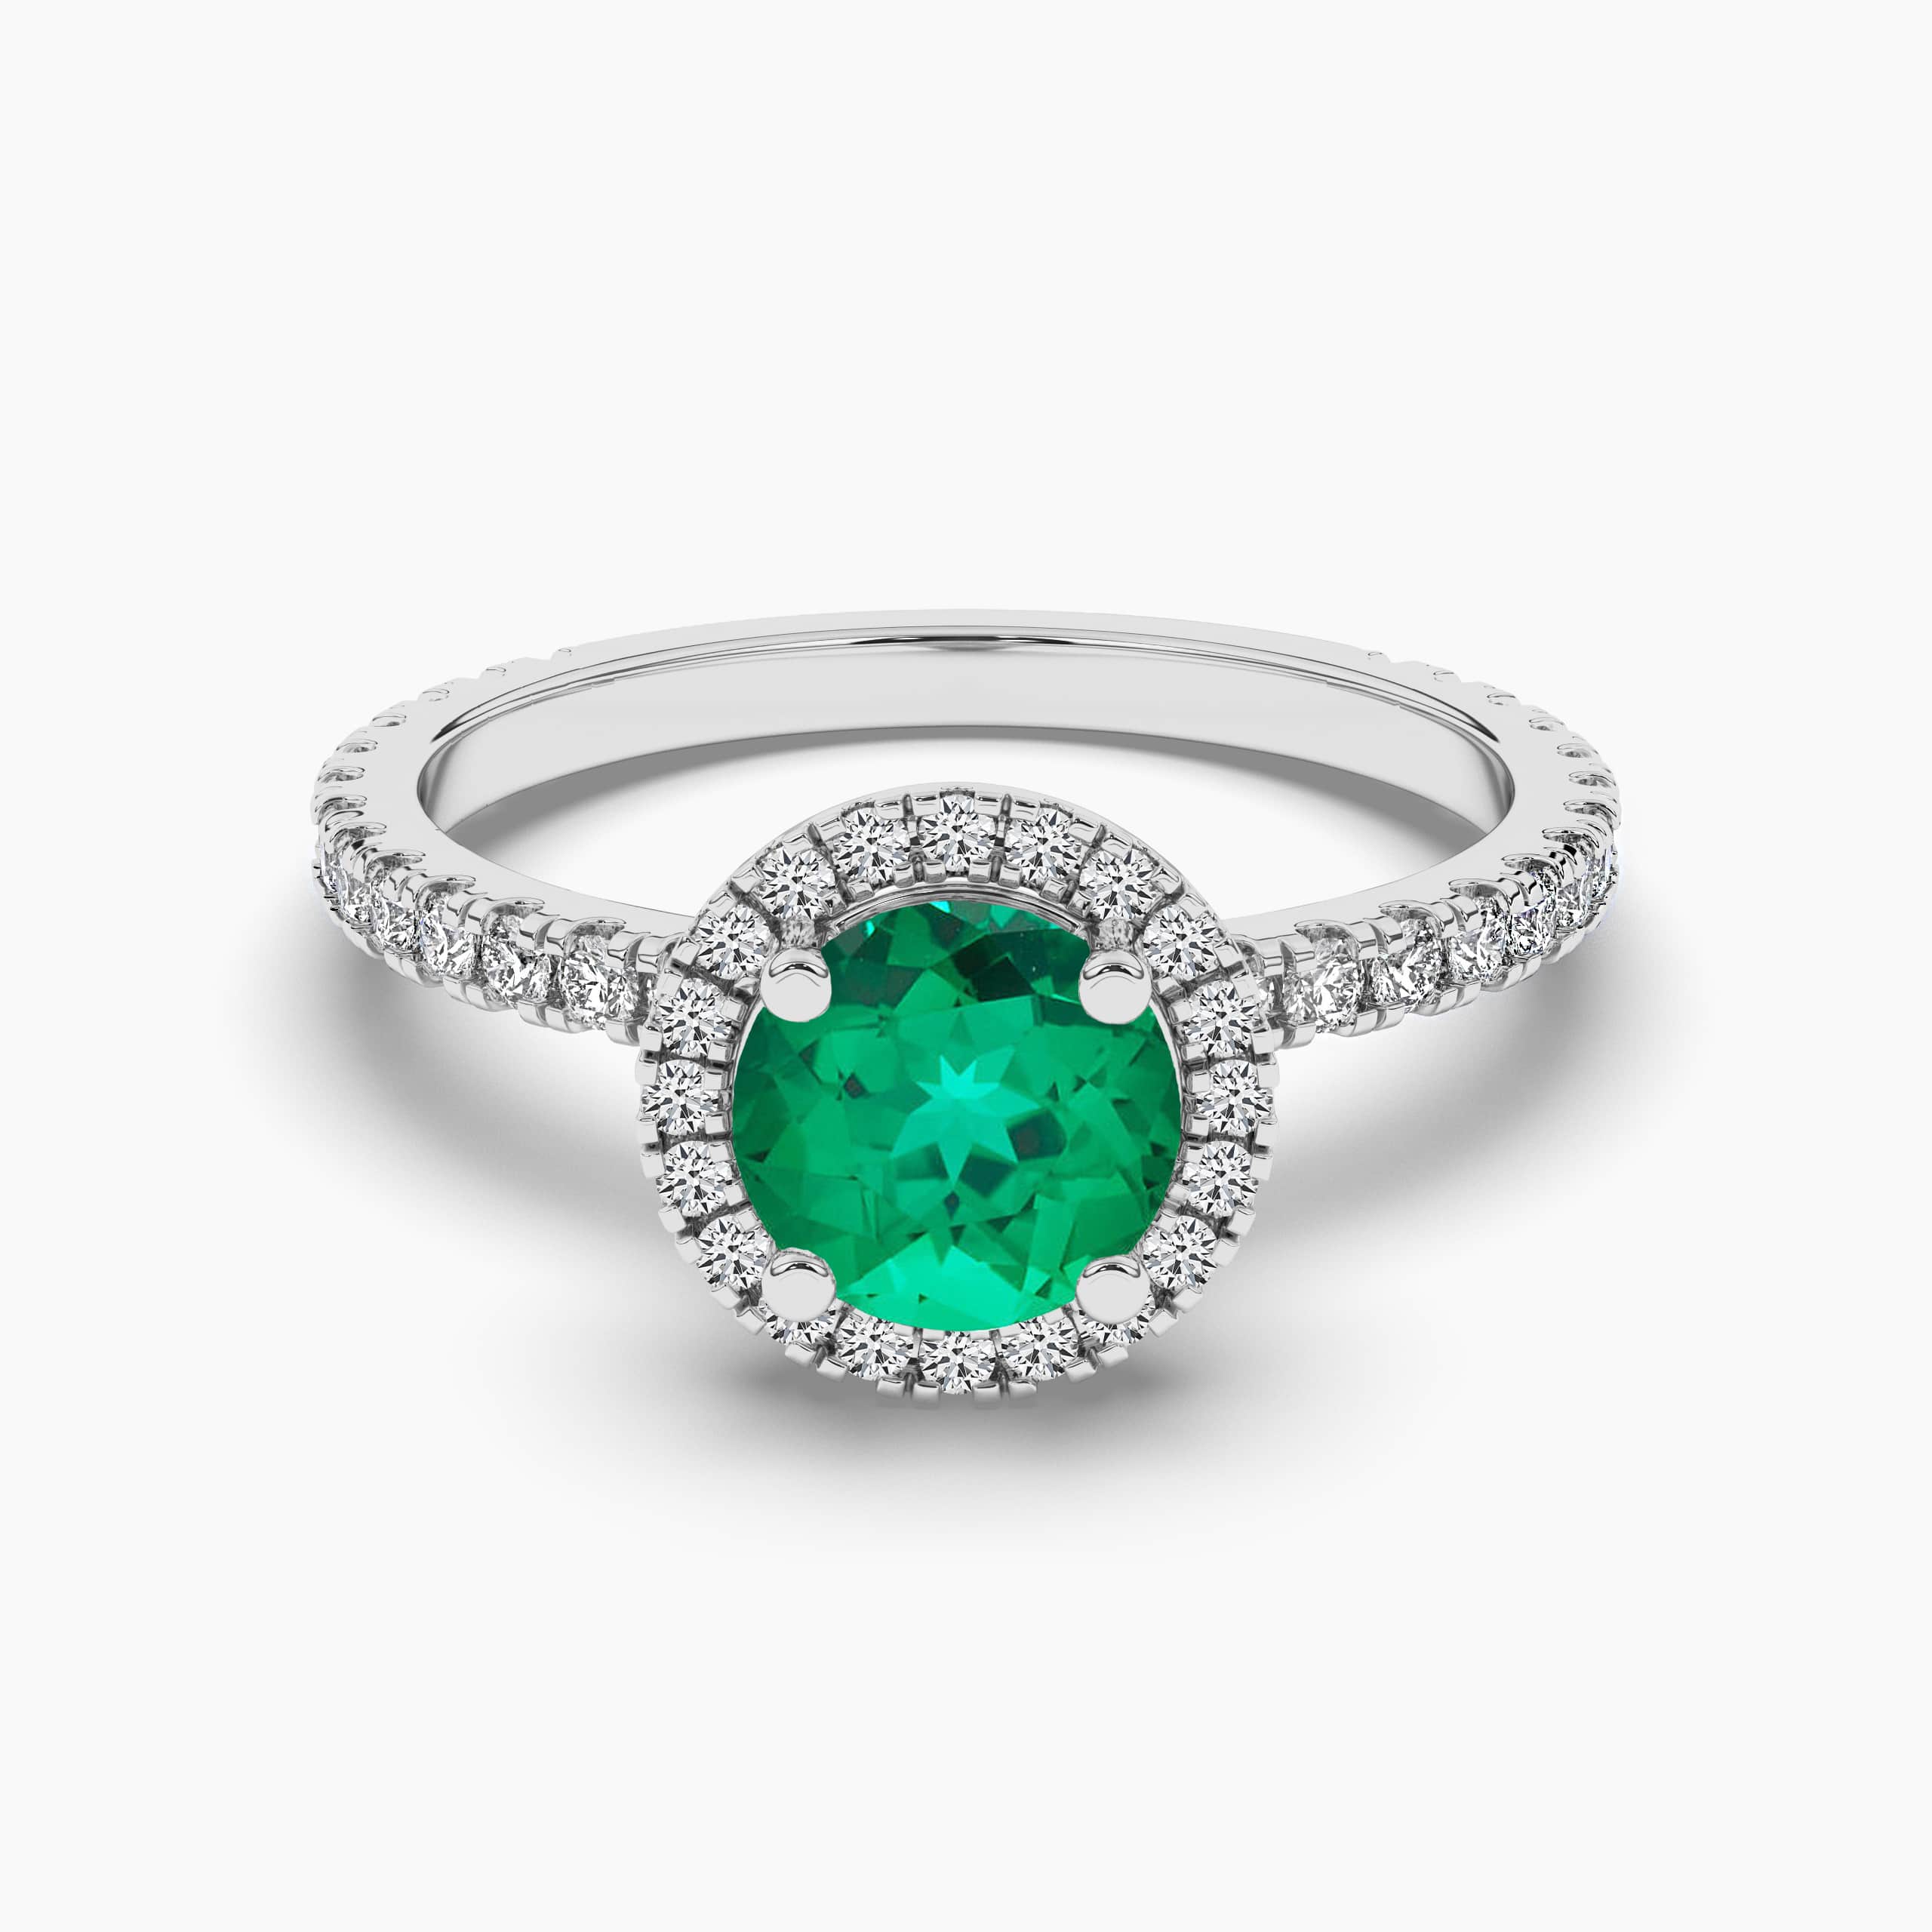 Round Cut Emerald Halo Ring, White Gold